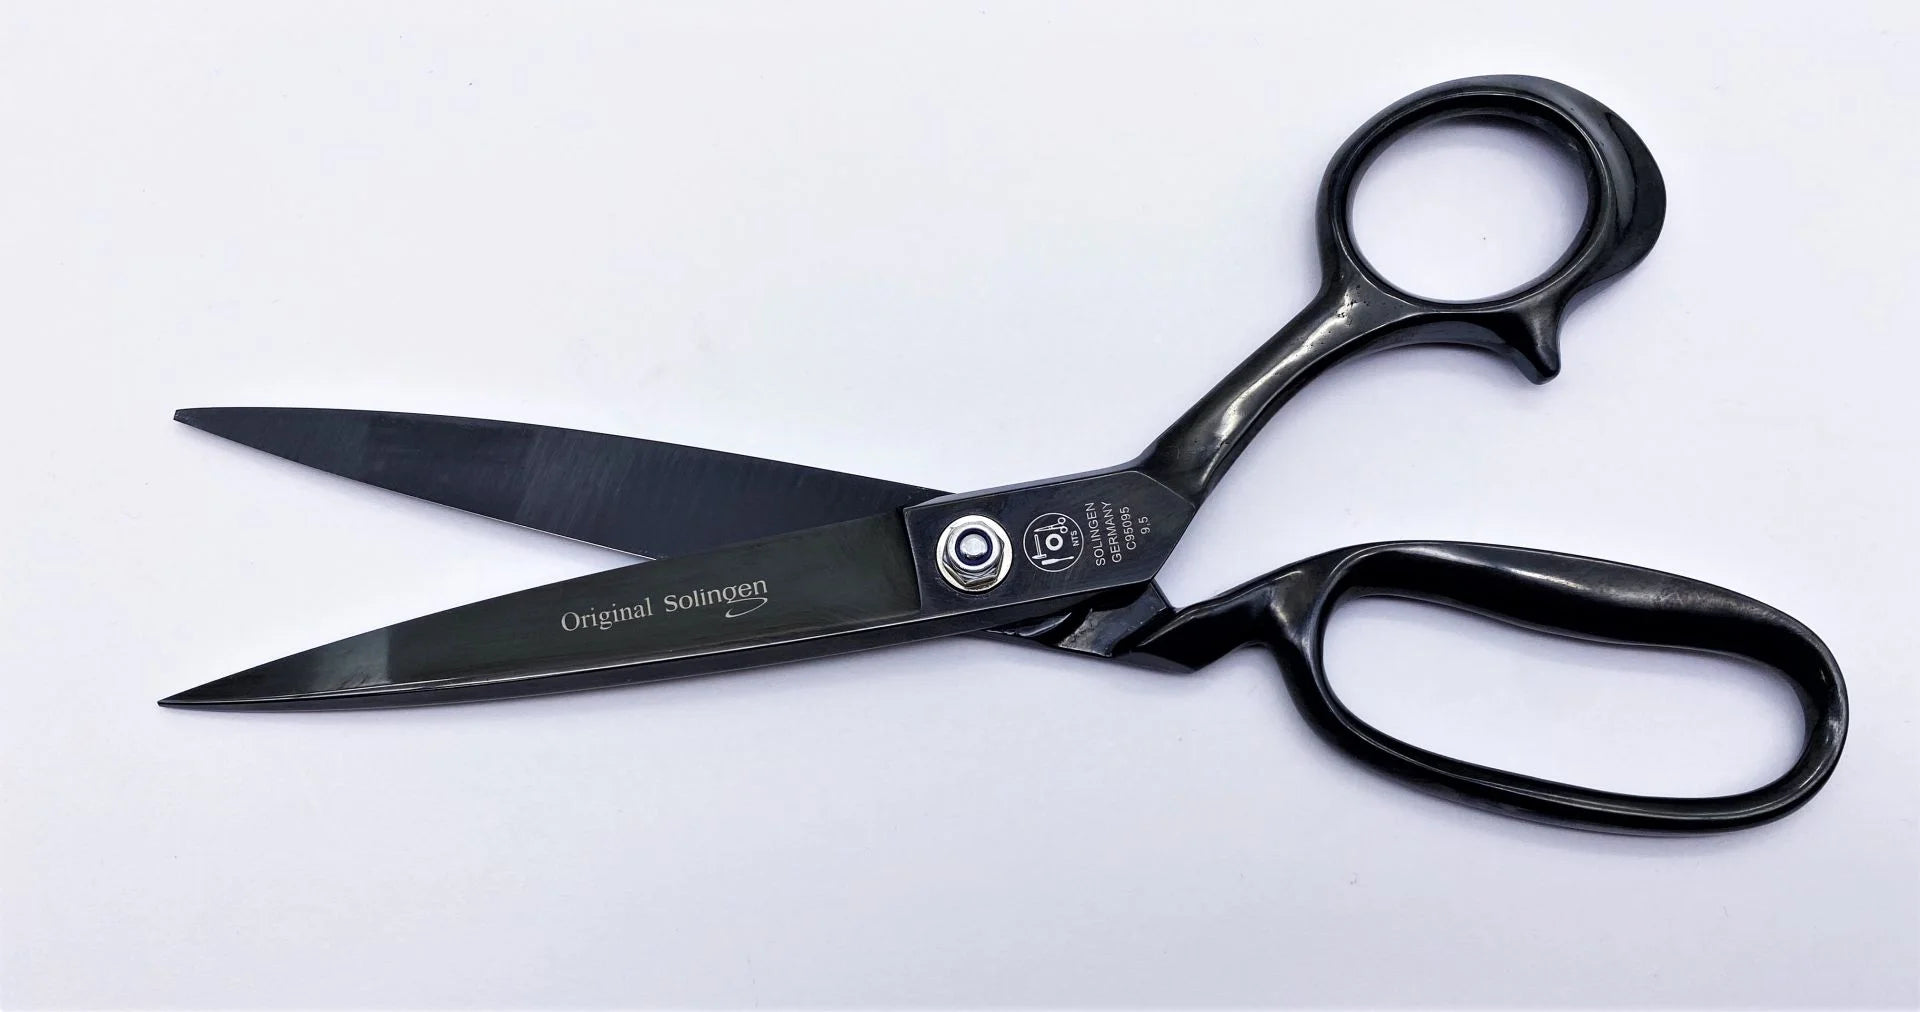 Black Edition Tailor's Shears Textile Scissors Fabric Shears Industrial Scissors, approx. 24 cm 9.5" inch